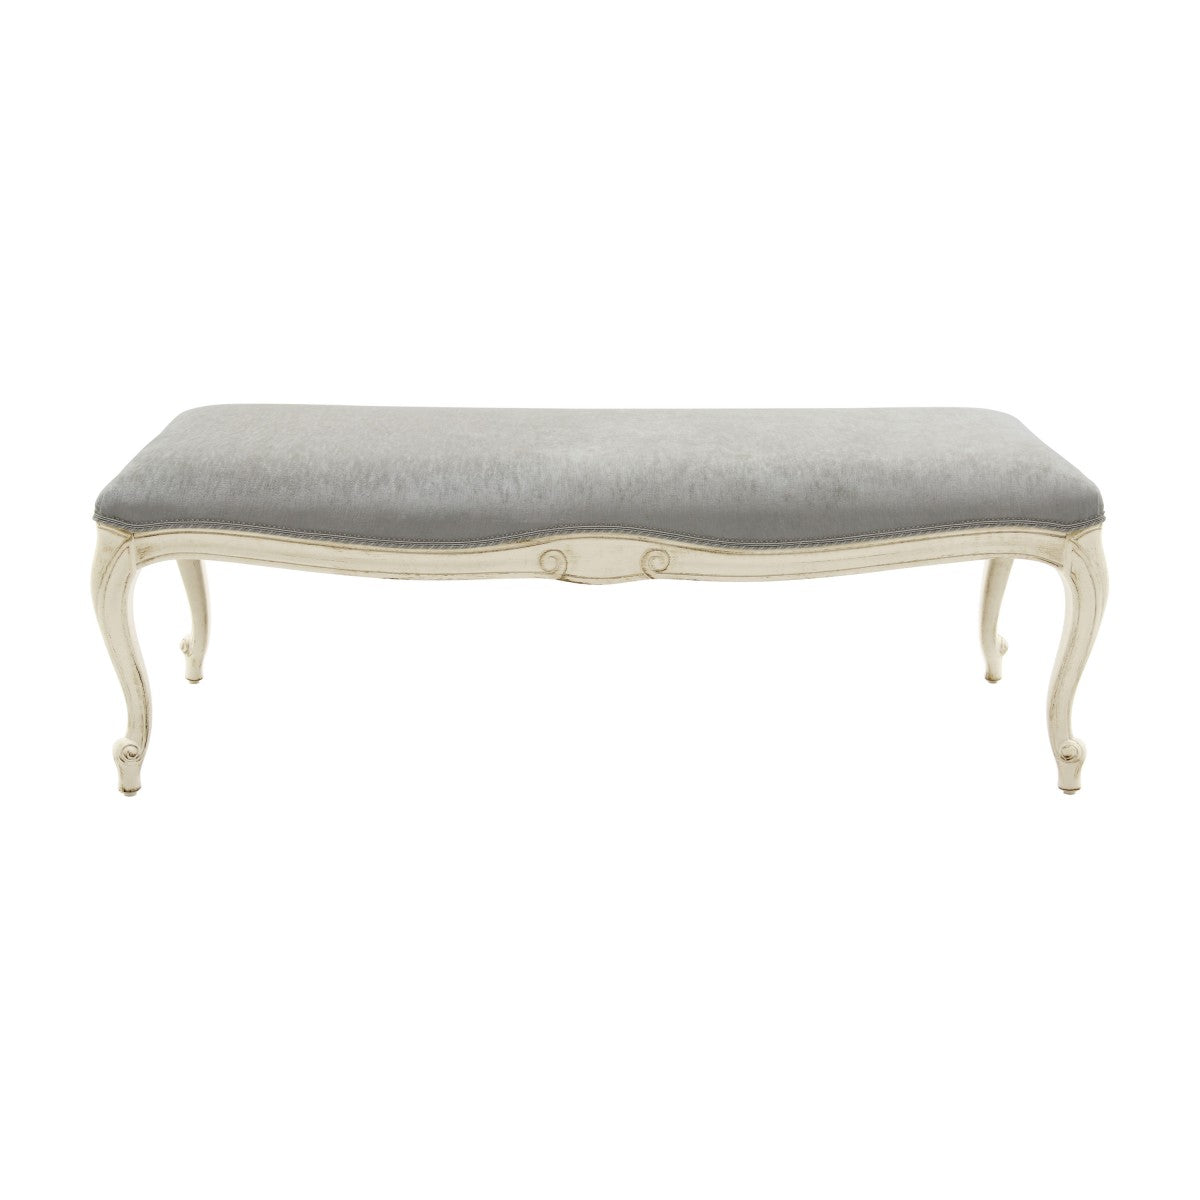 Brena Bespoke Upholstered Large Classic Bench MS369Q Custom Made To Order